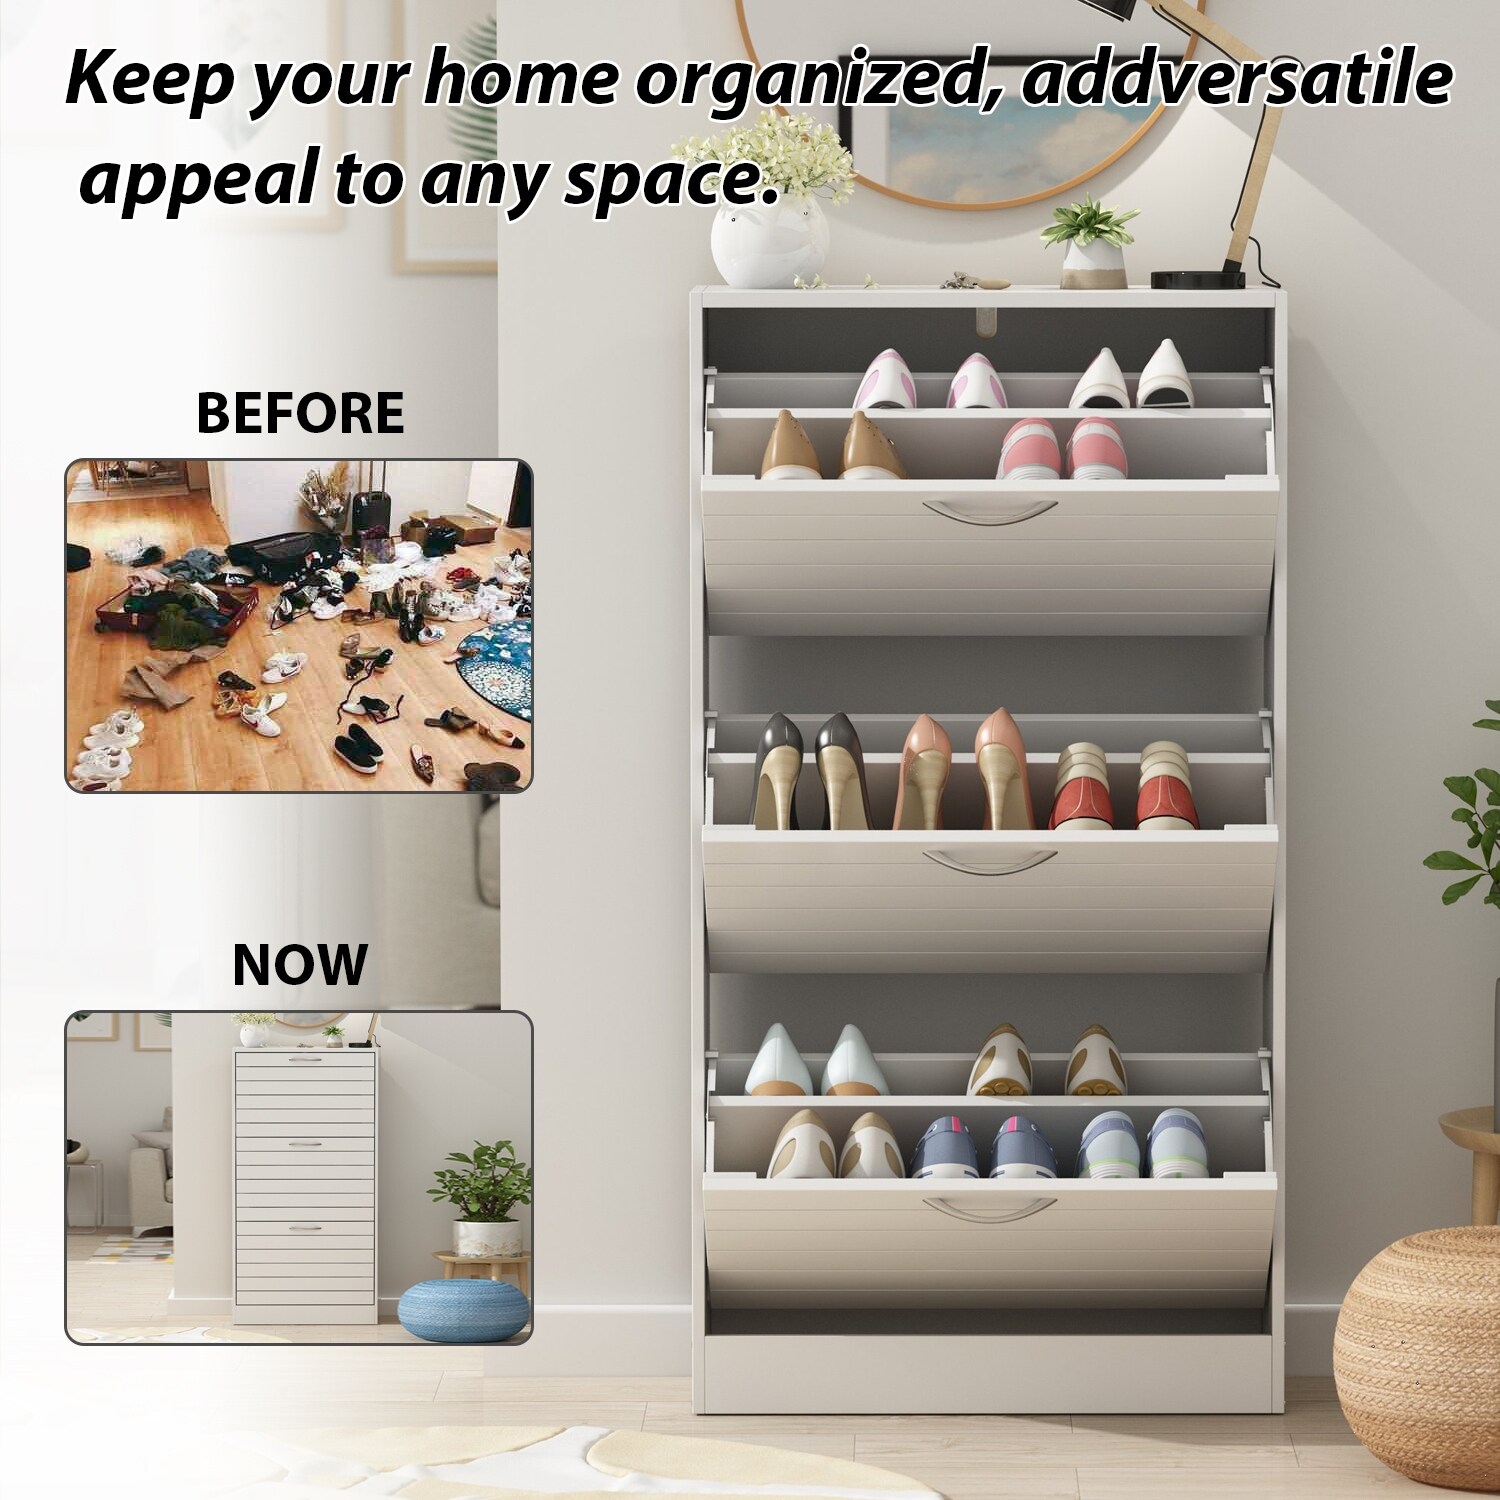 https://ak1.ostkcdn.com/images/products/is/images/direct/7cd1b6a2638292dbcd1a54d91c3808a908a1b760/Shoe-Storage-Cabinet-Modern-Shoe-Storage-Cabinet-for-Entryway-Hallway.jpg